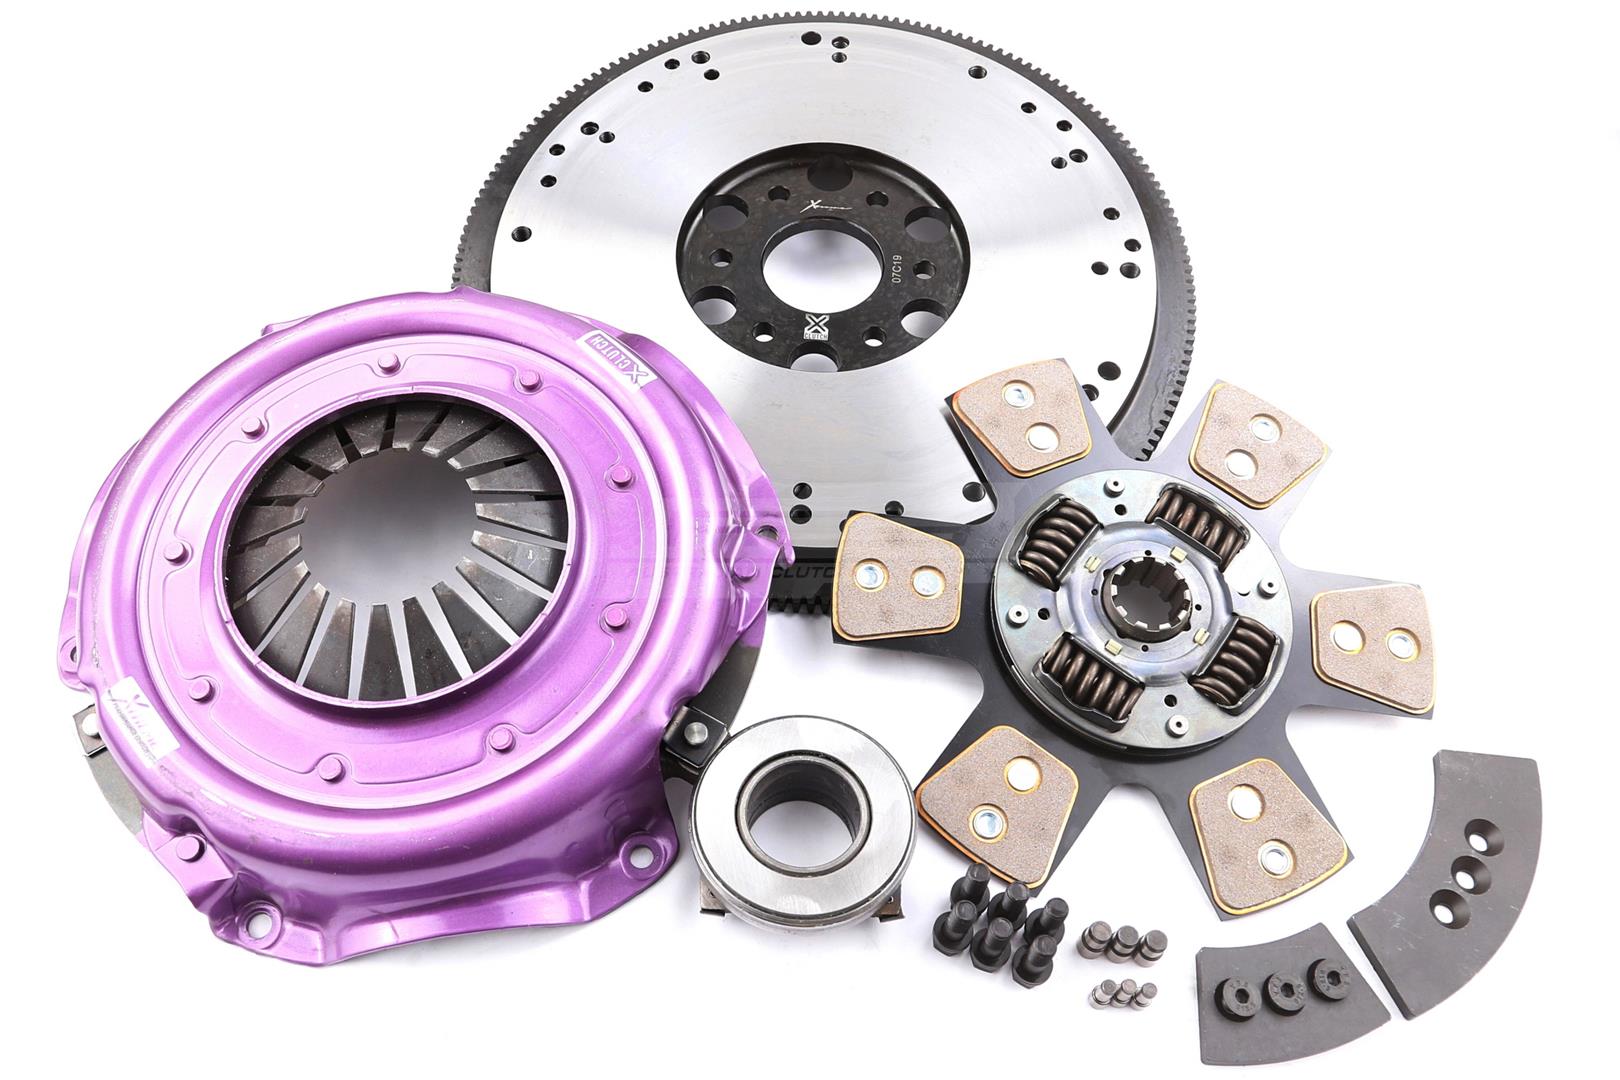 Clutch Kit - Xtreme Performance Heavy Duty Sprung Ceramic Incl Flywheel 940Nm MUSTANG 7.0